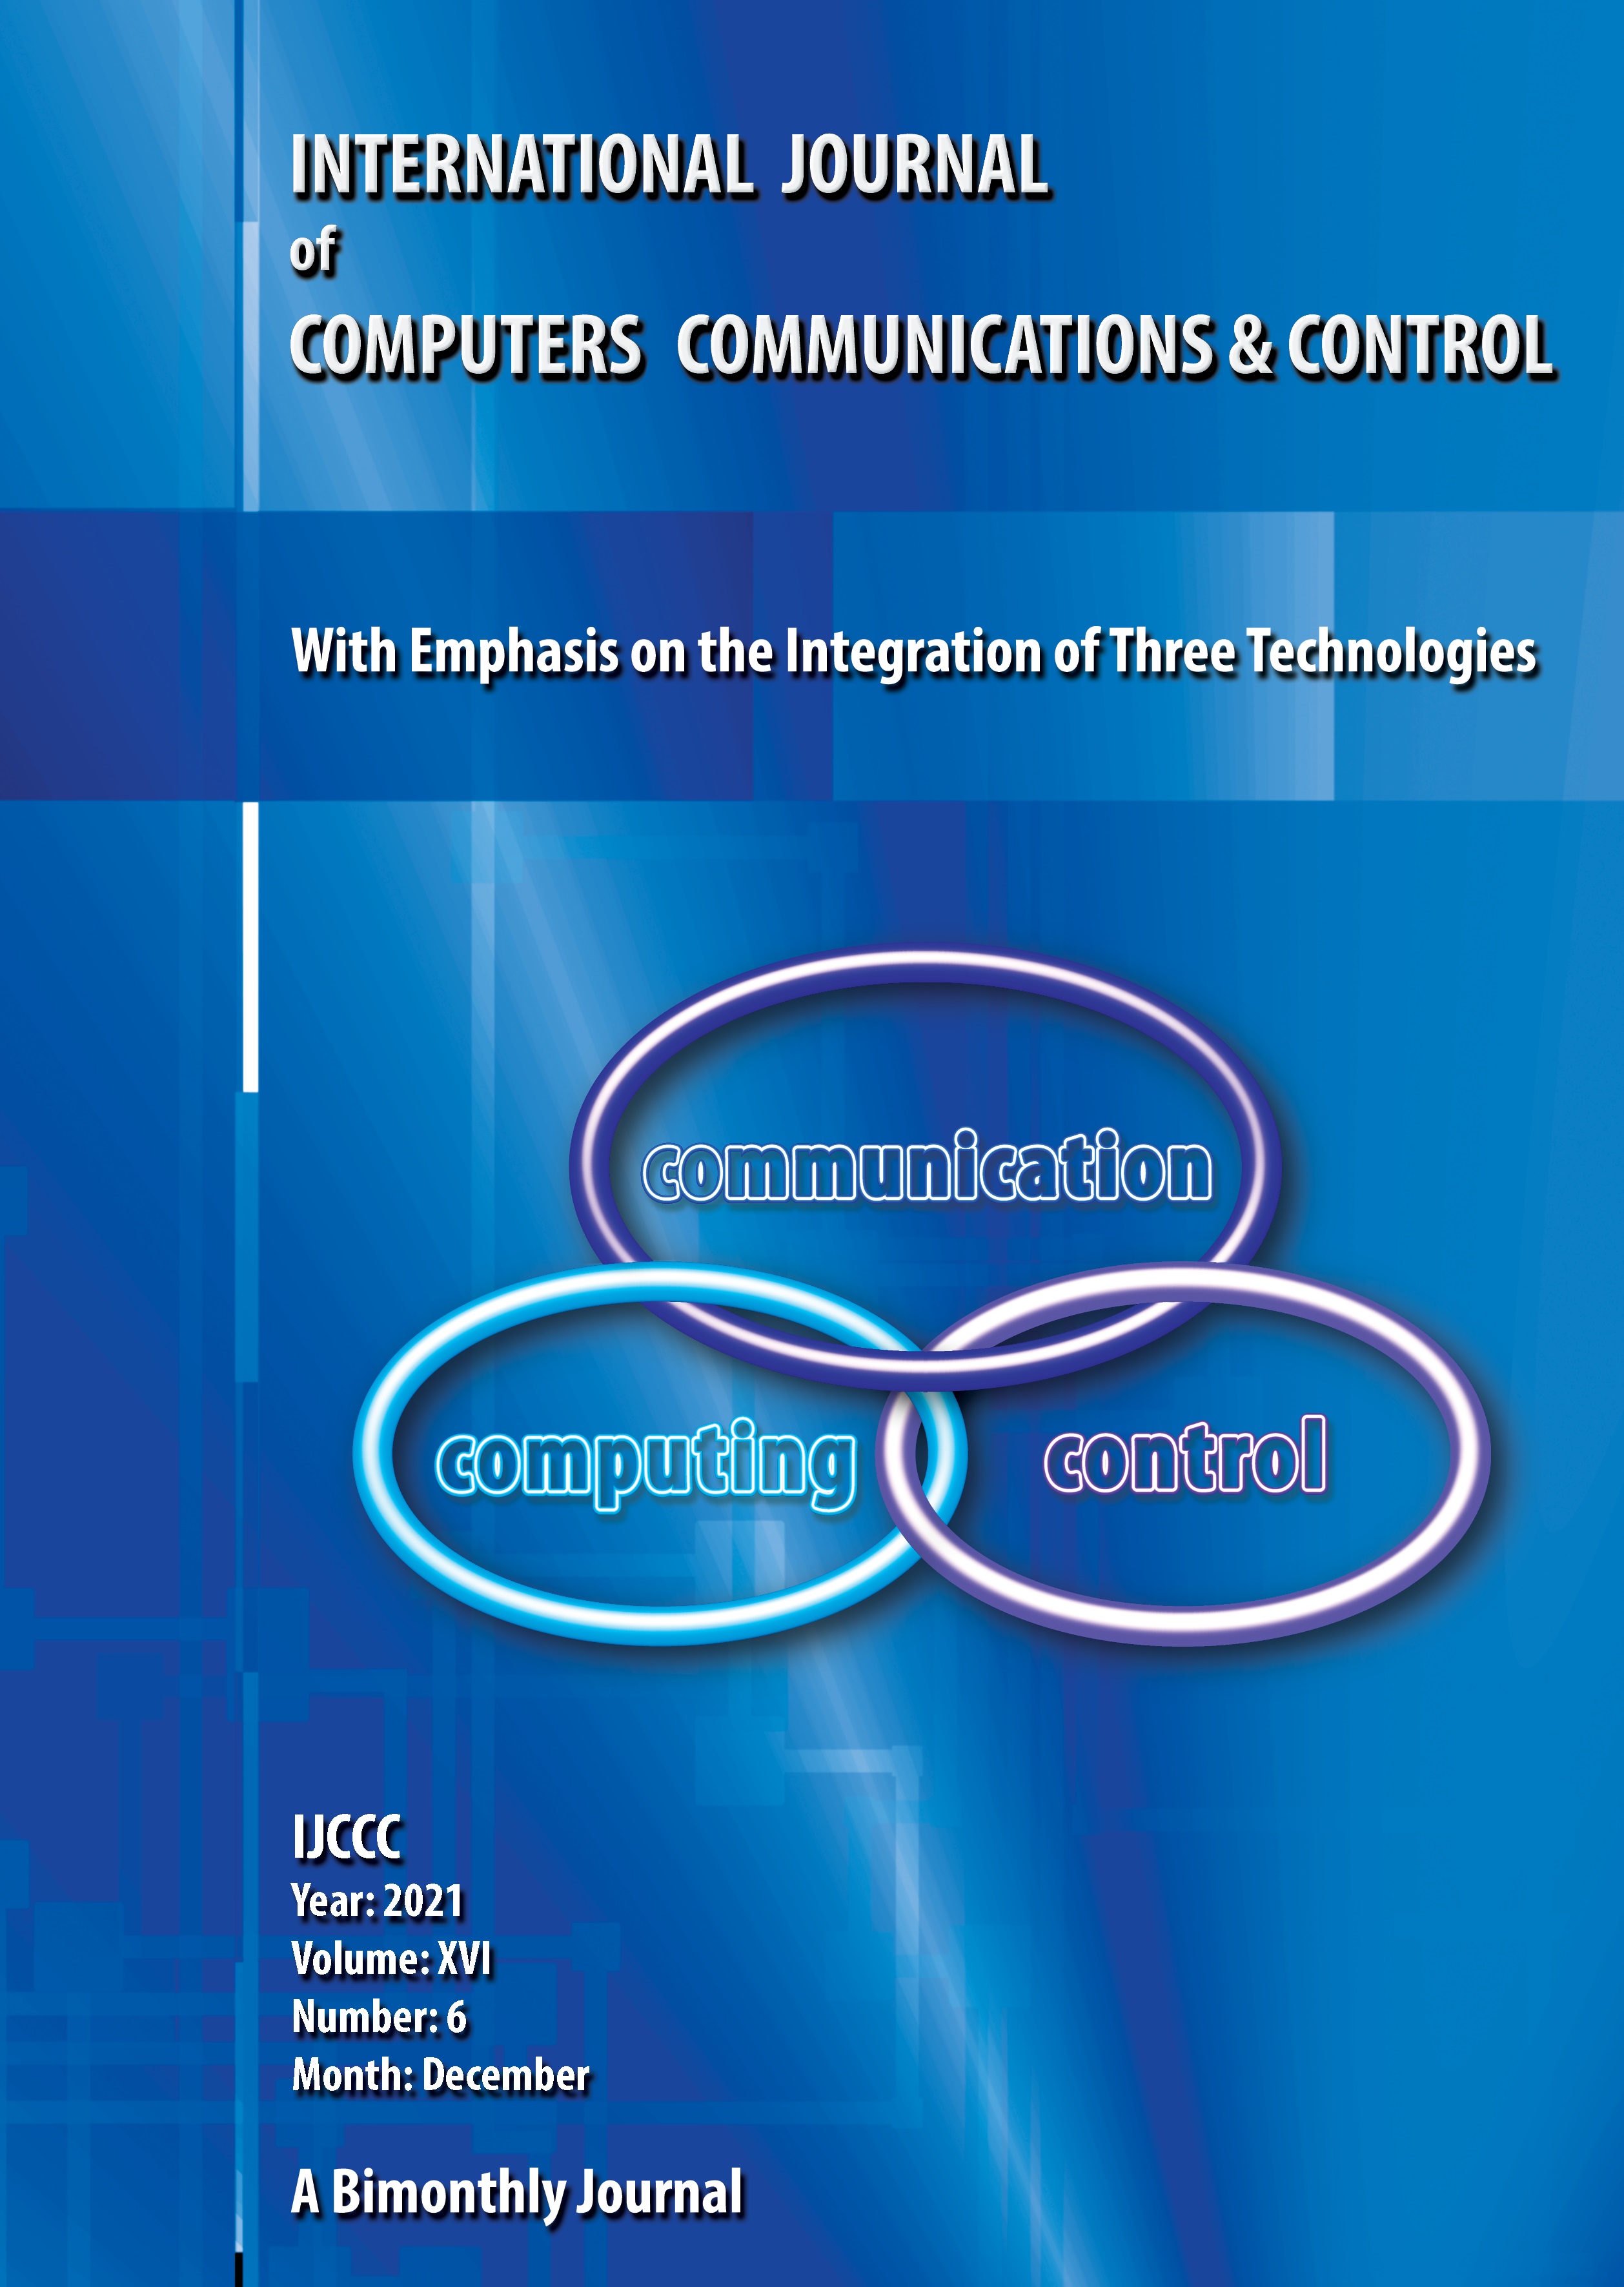 					View Vol. 16 No. 6 (2021): International Journal of Computers Communications & Control (December)
				